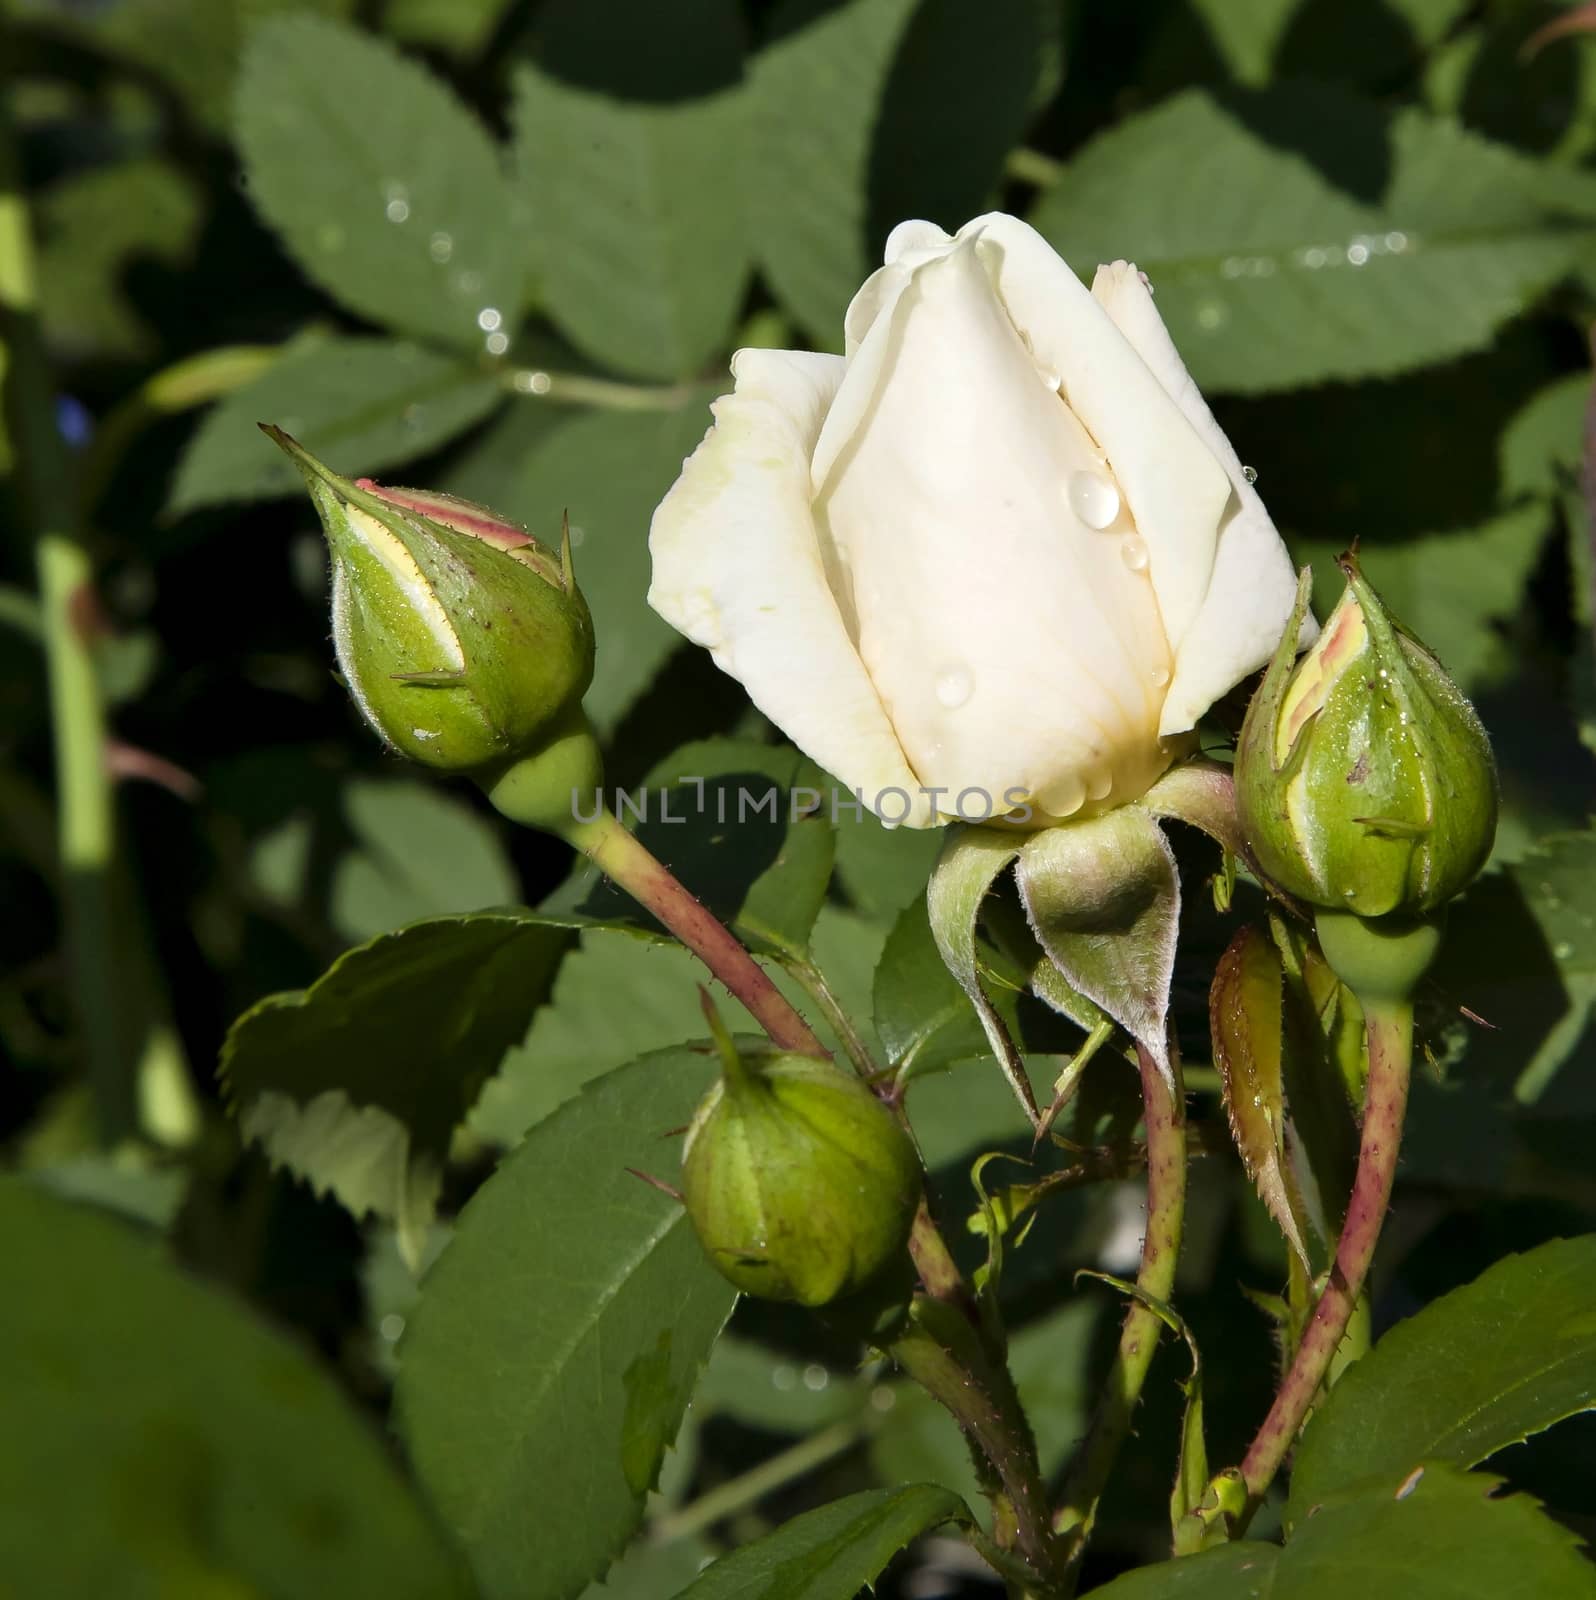 Bud cream roses with dew drops in morning sunlight